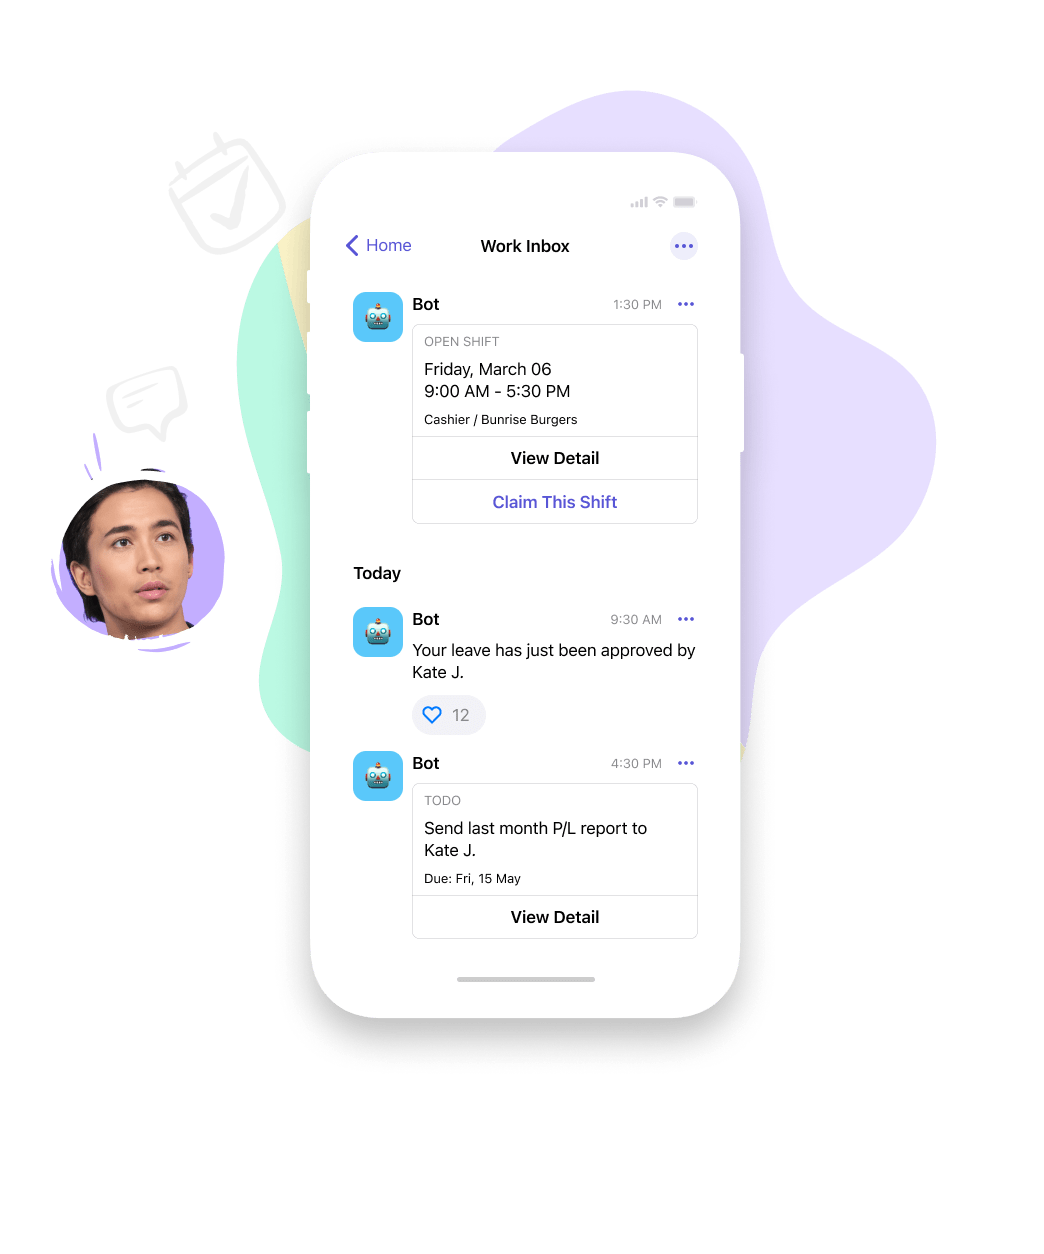 Schedule and Messaging in just one app